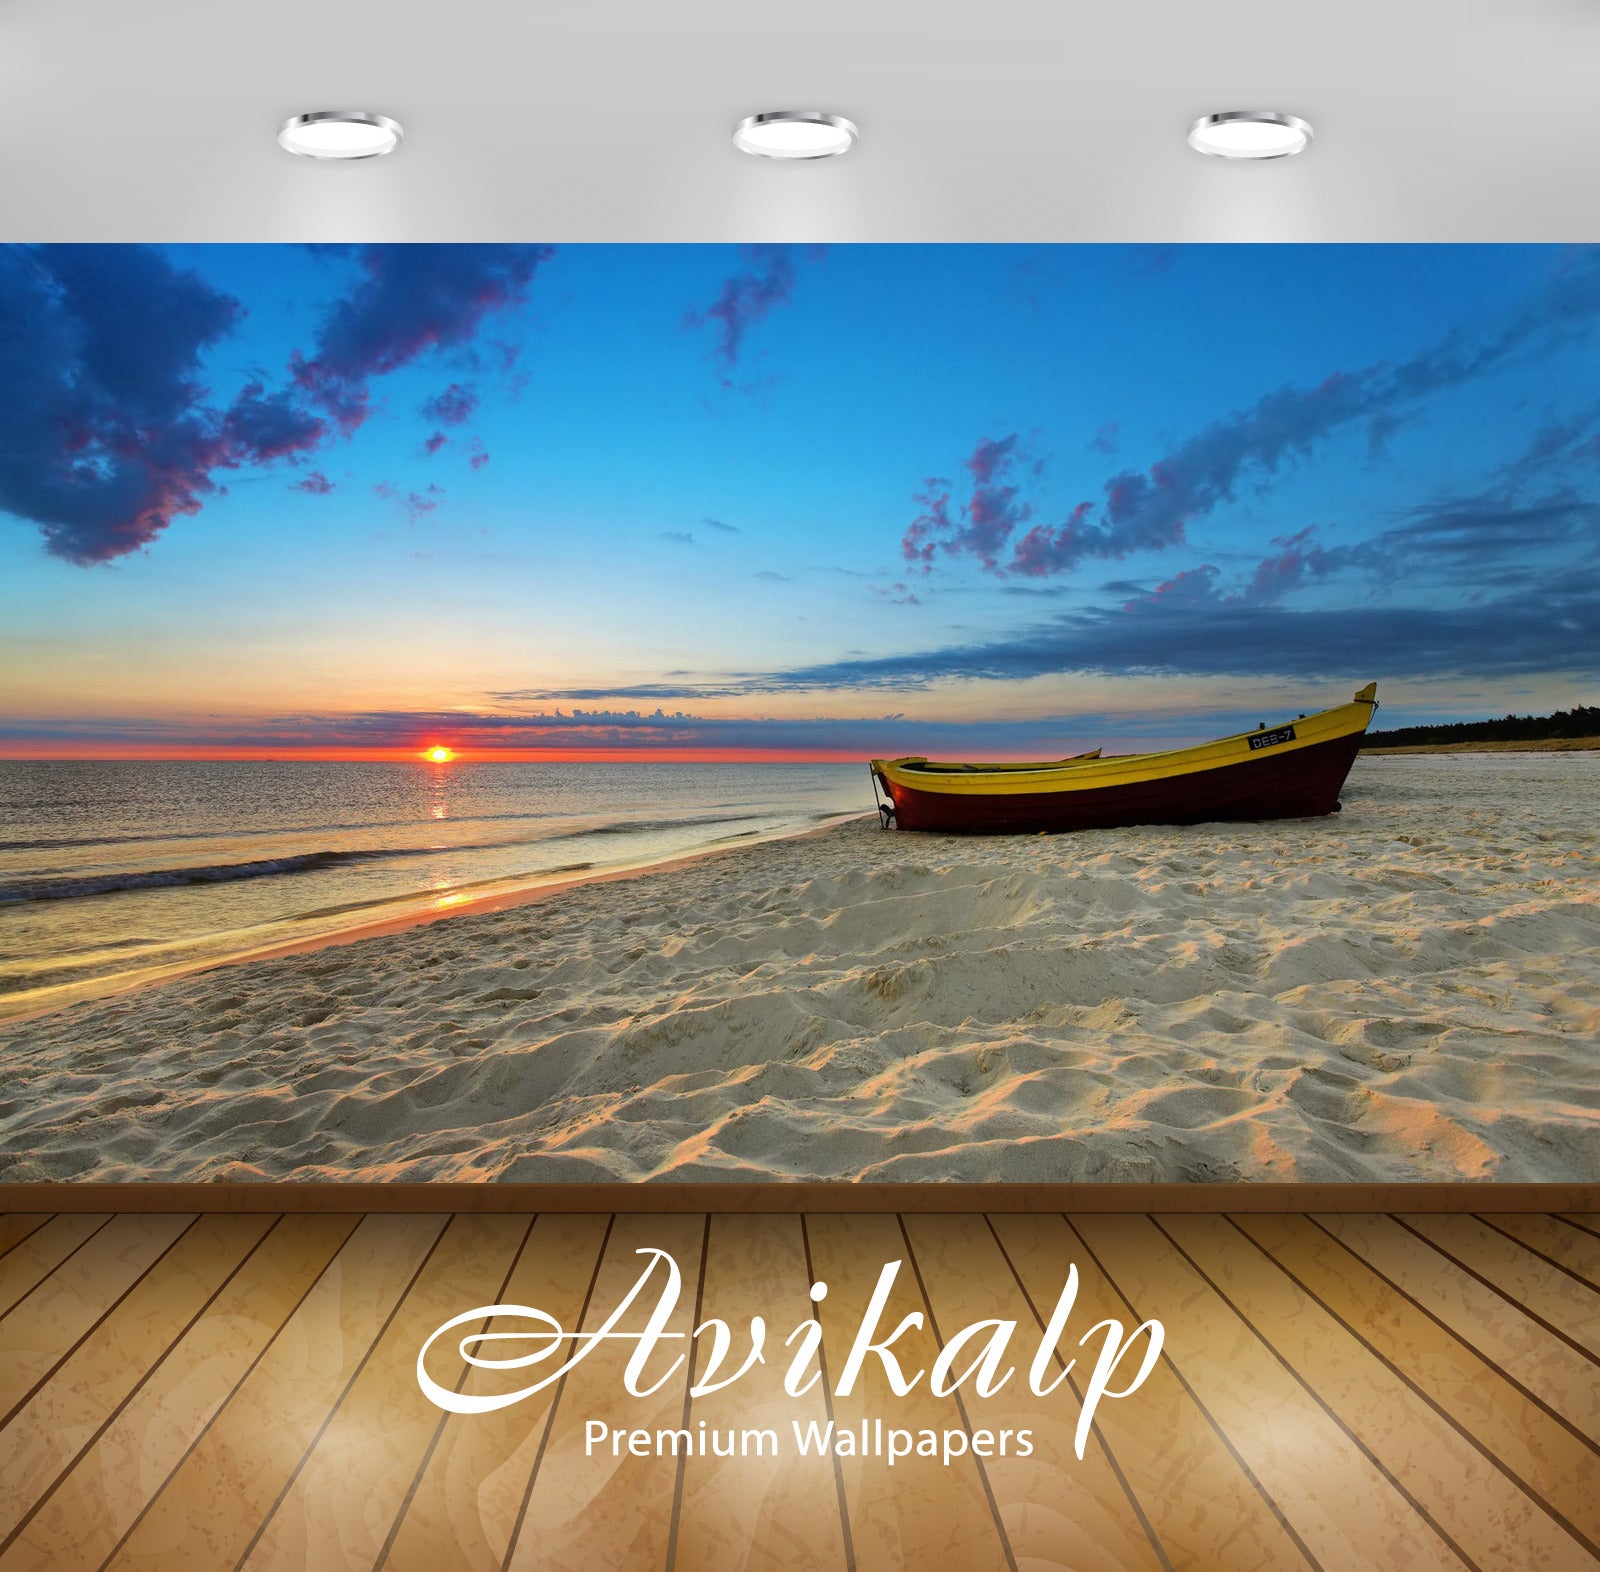 Avikalp Exclusive Awi1439 Beach Island Full HD Wallpapers for Living room, Hall, Kids Room, Kitchen,